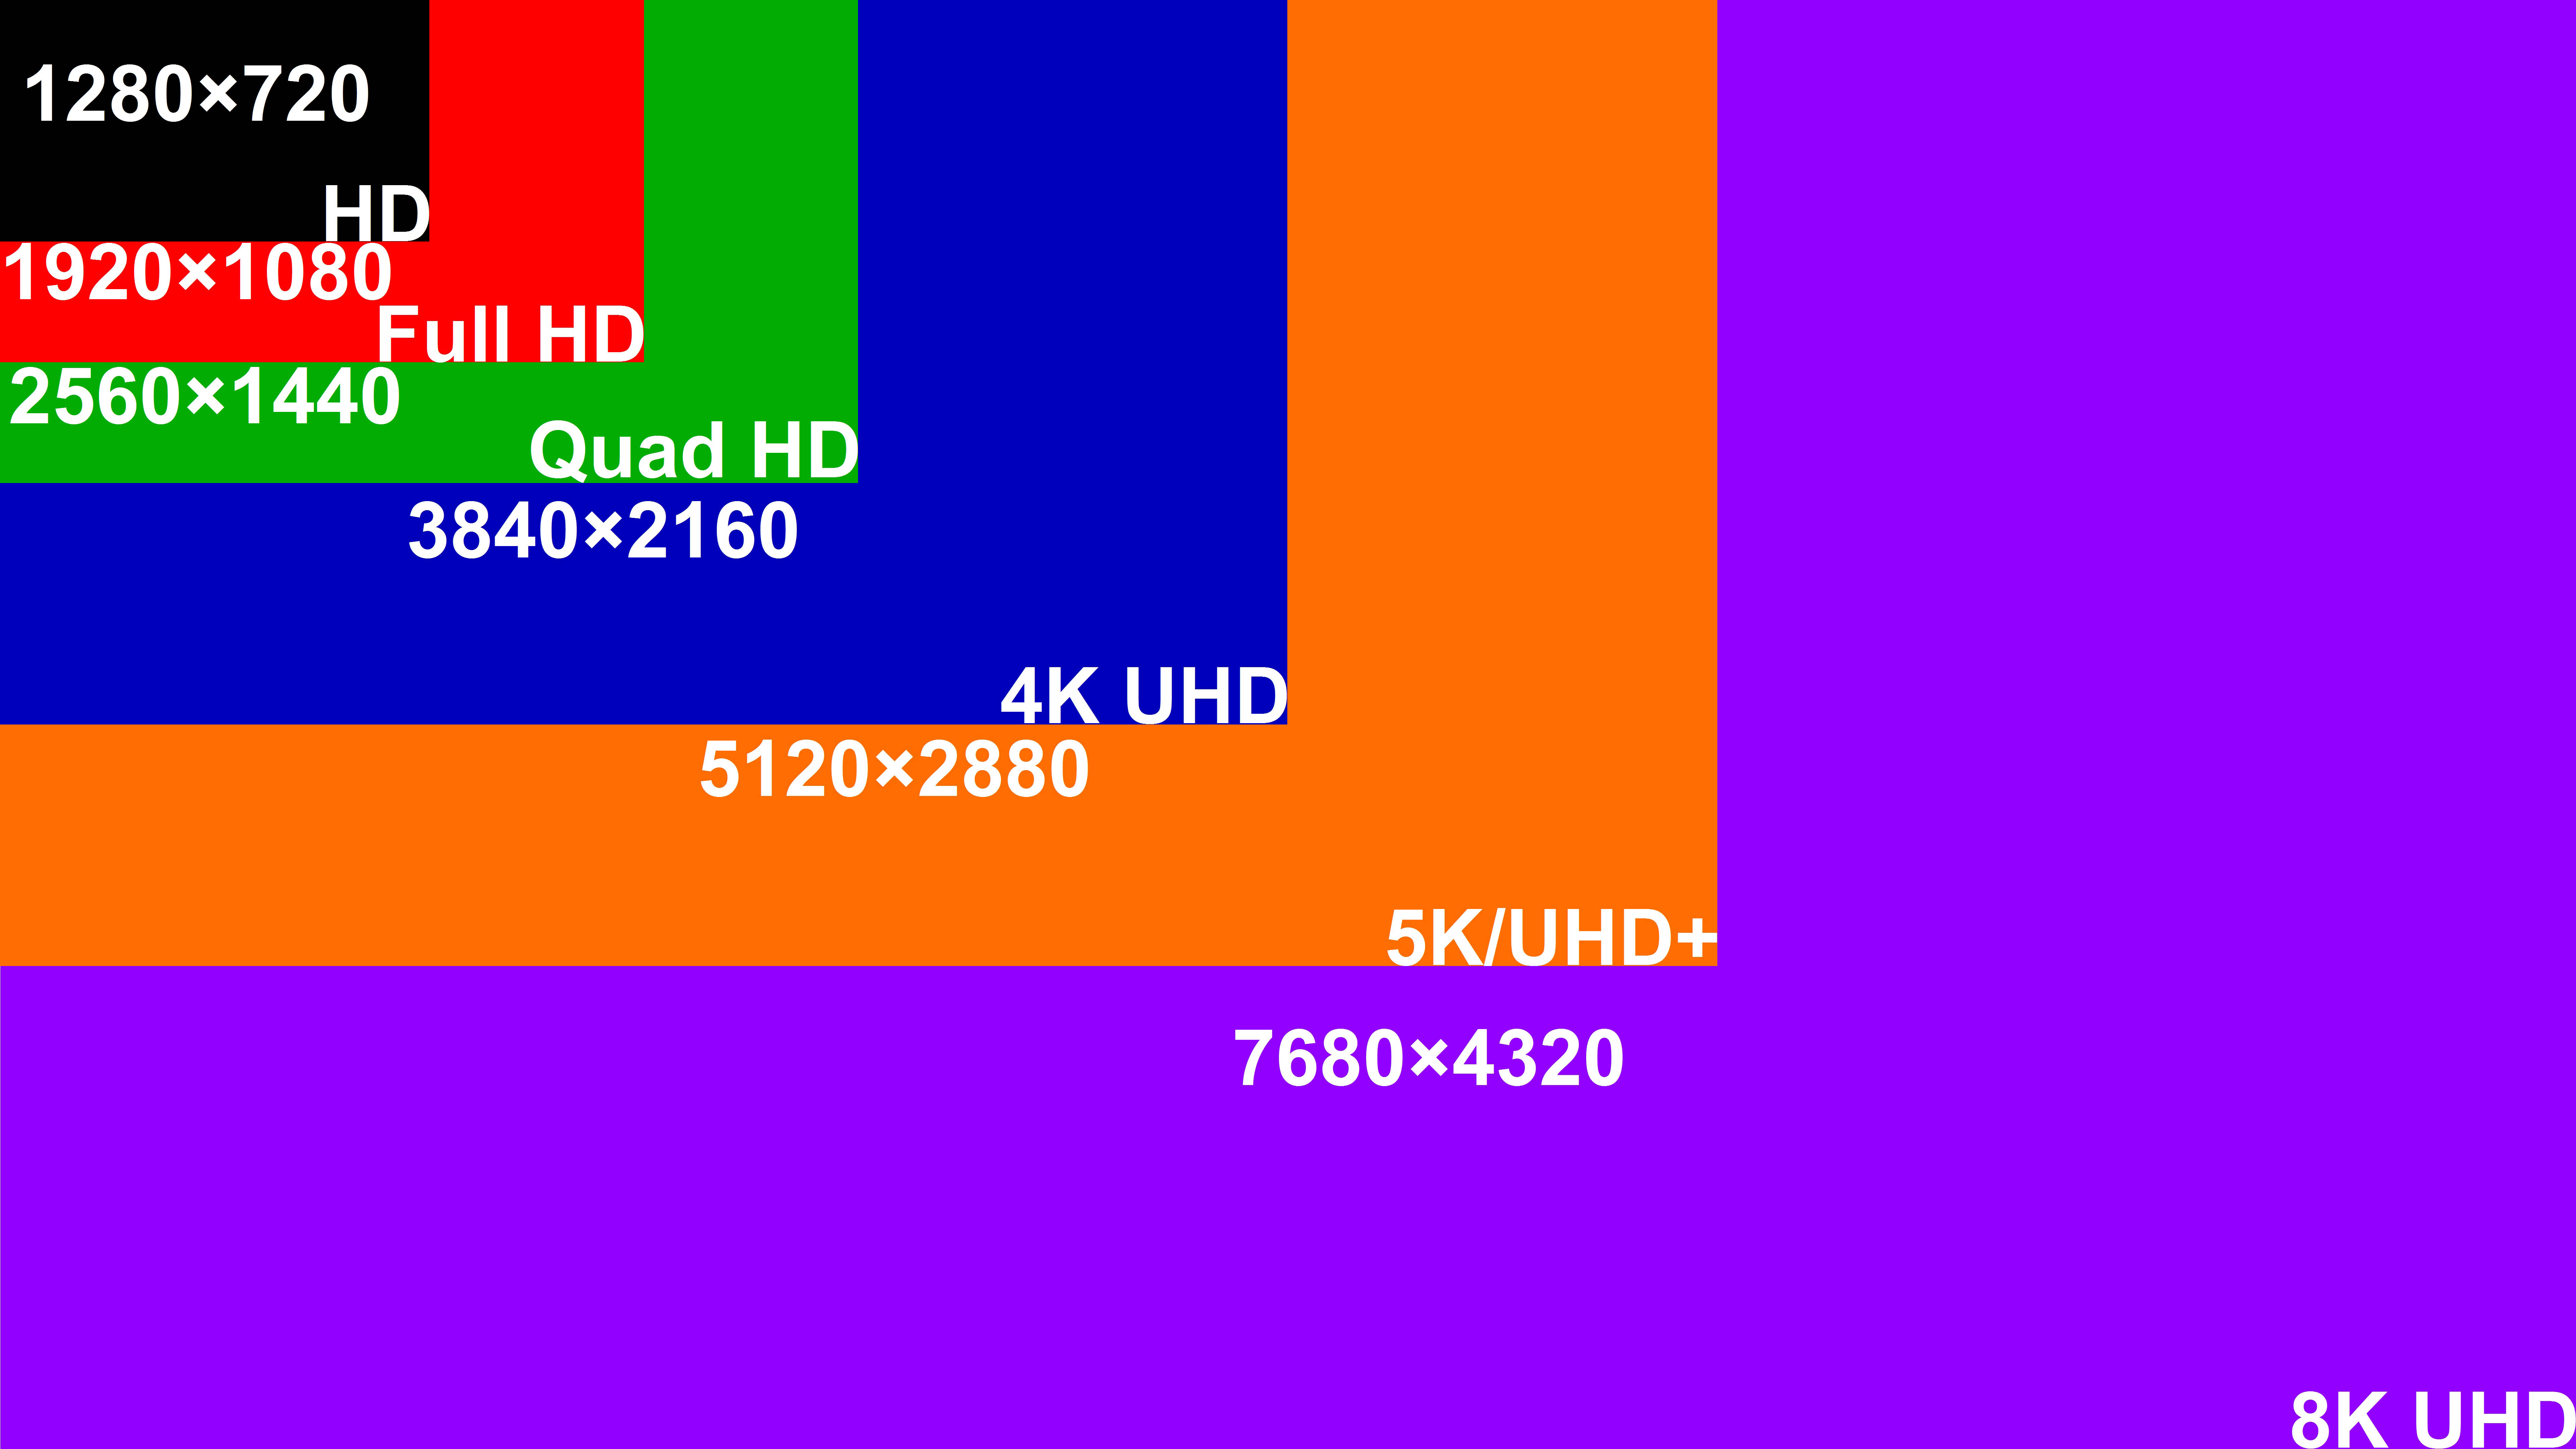 Say Good-Bye to 4K, Roku and TCL Team-Up for 8K | The Nerdy